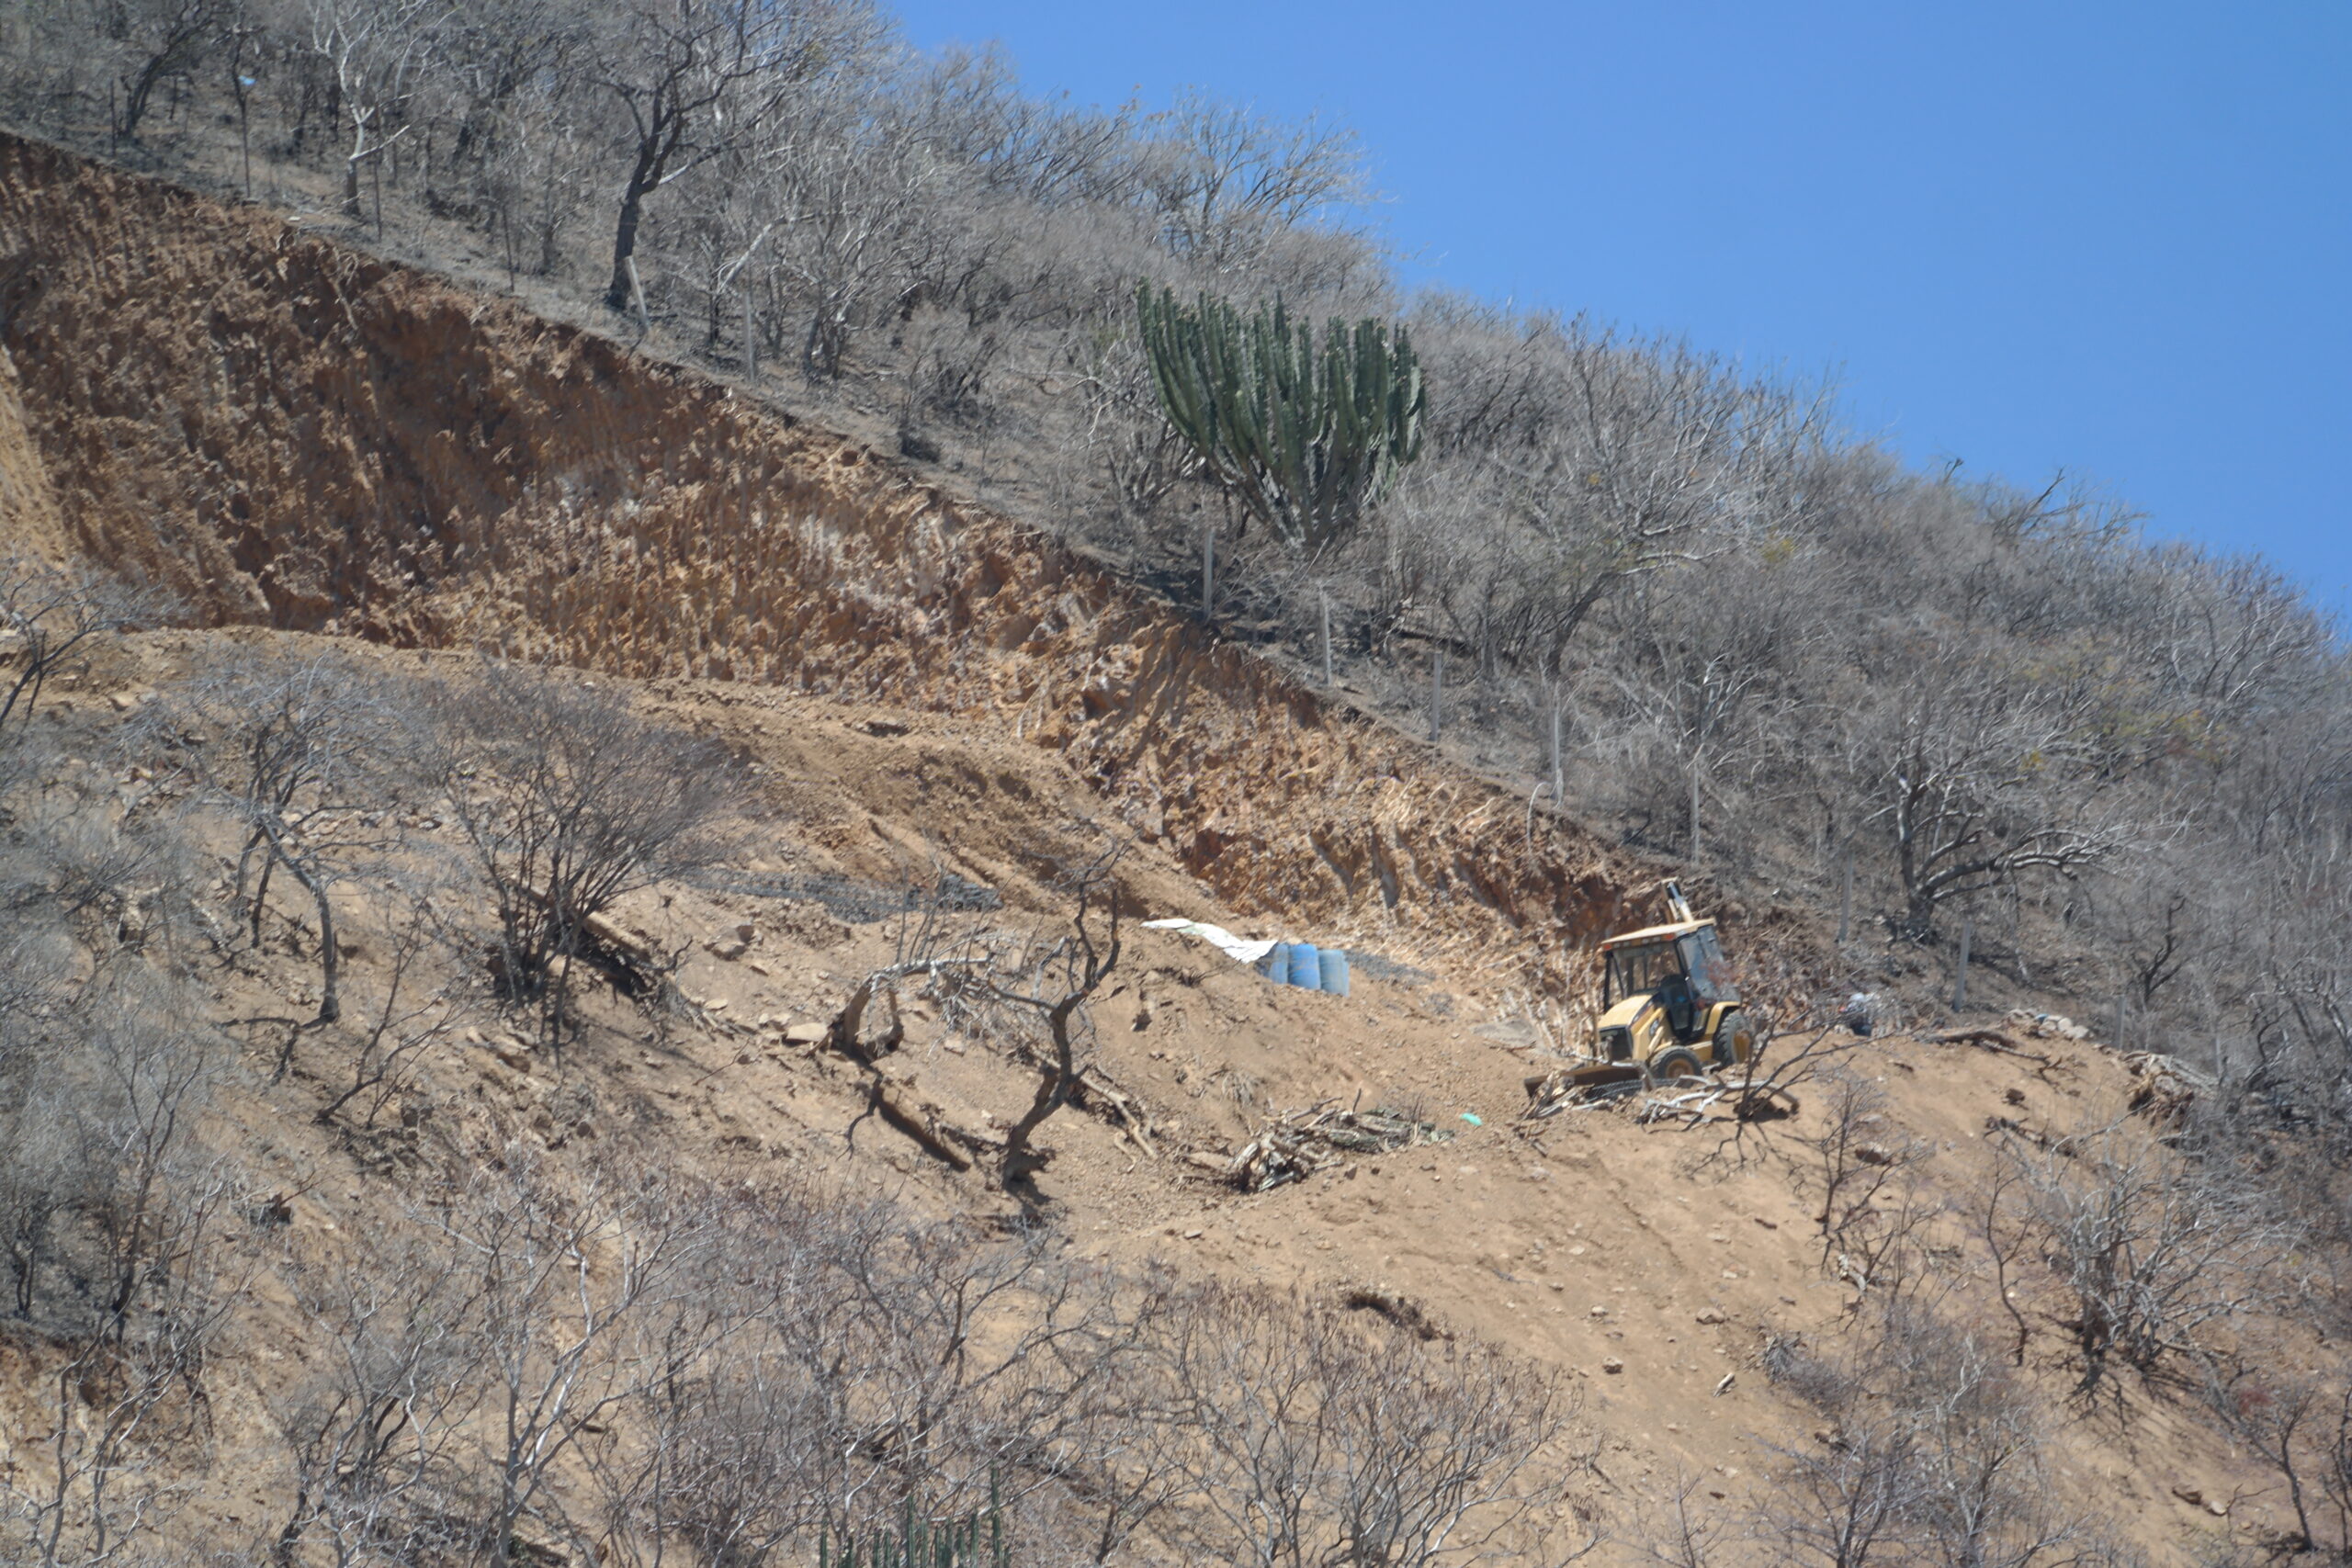 Backhoe scars hill at Piedra Barrenada supposedly to clear a hiking trail